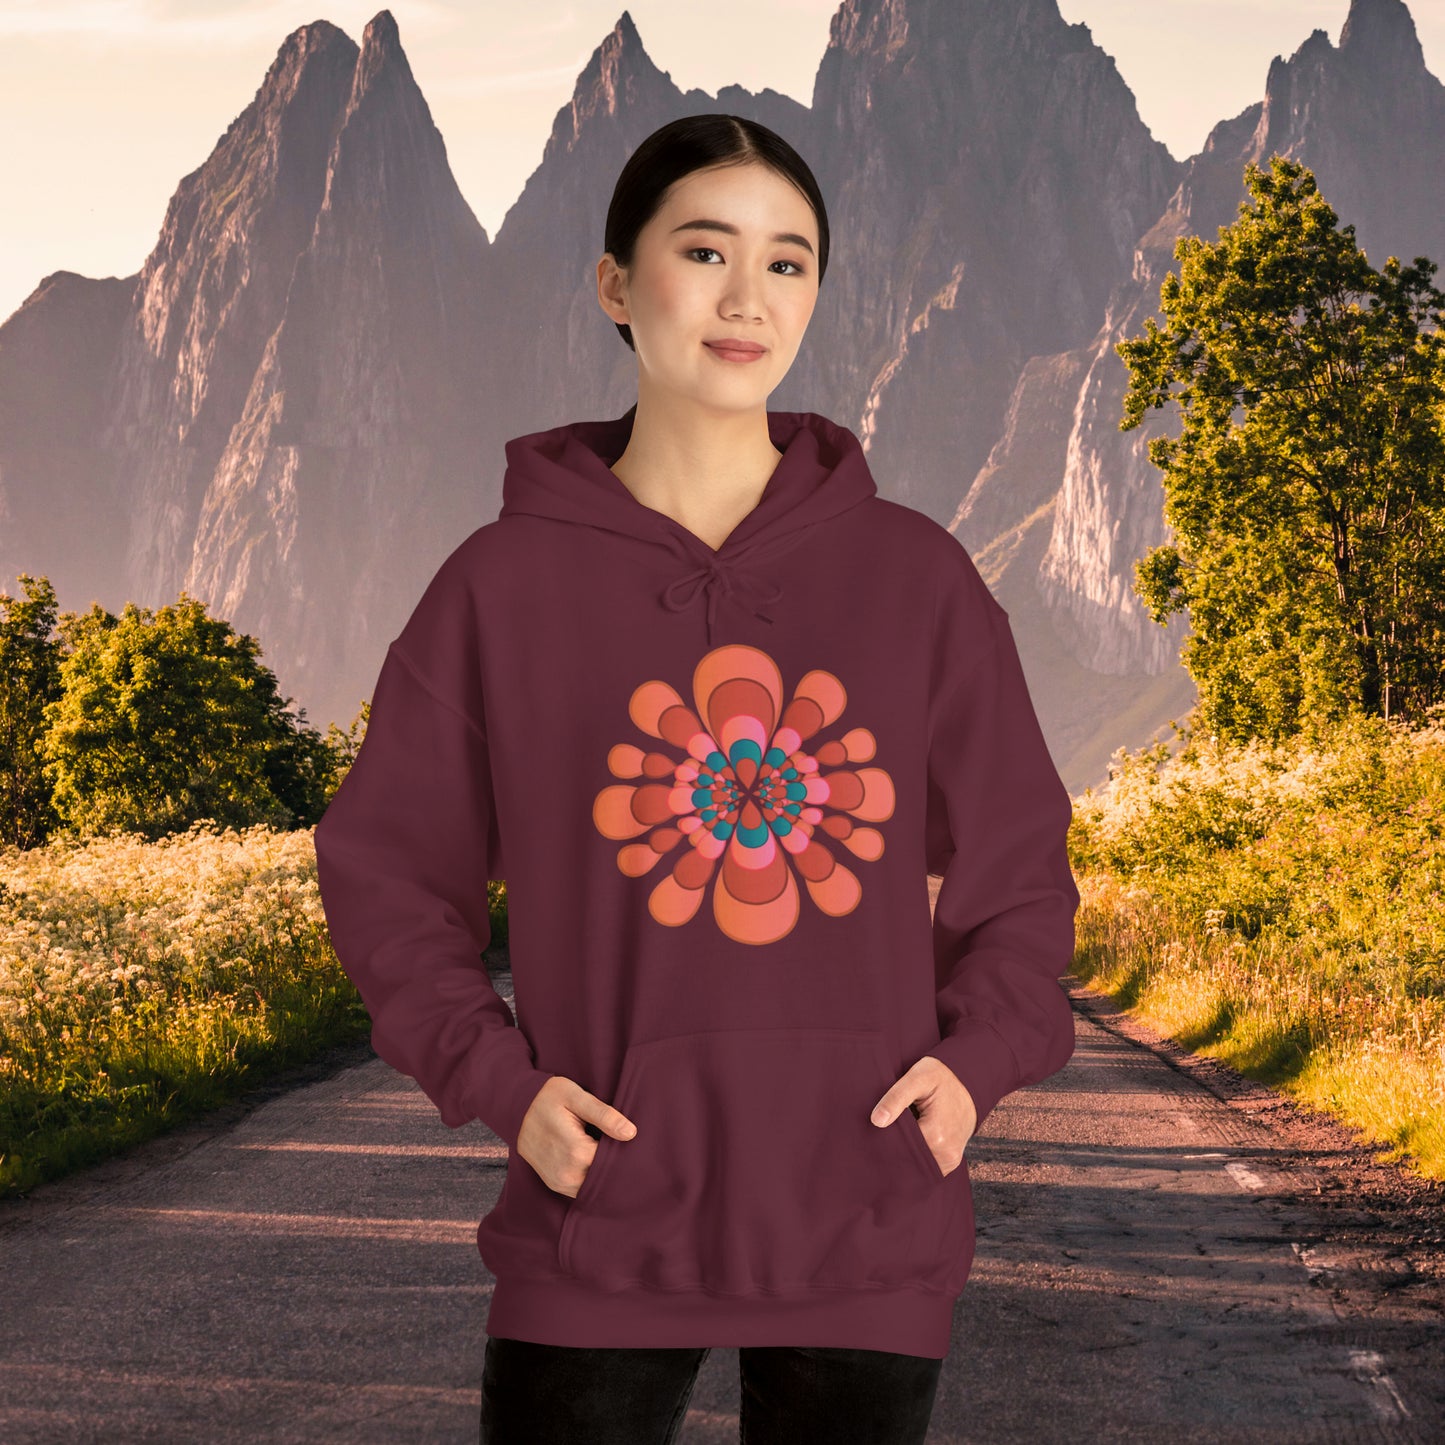 Colorful flower abstract design for this Unisex Heavy Blend™ Hooded Sweatshirt